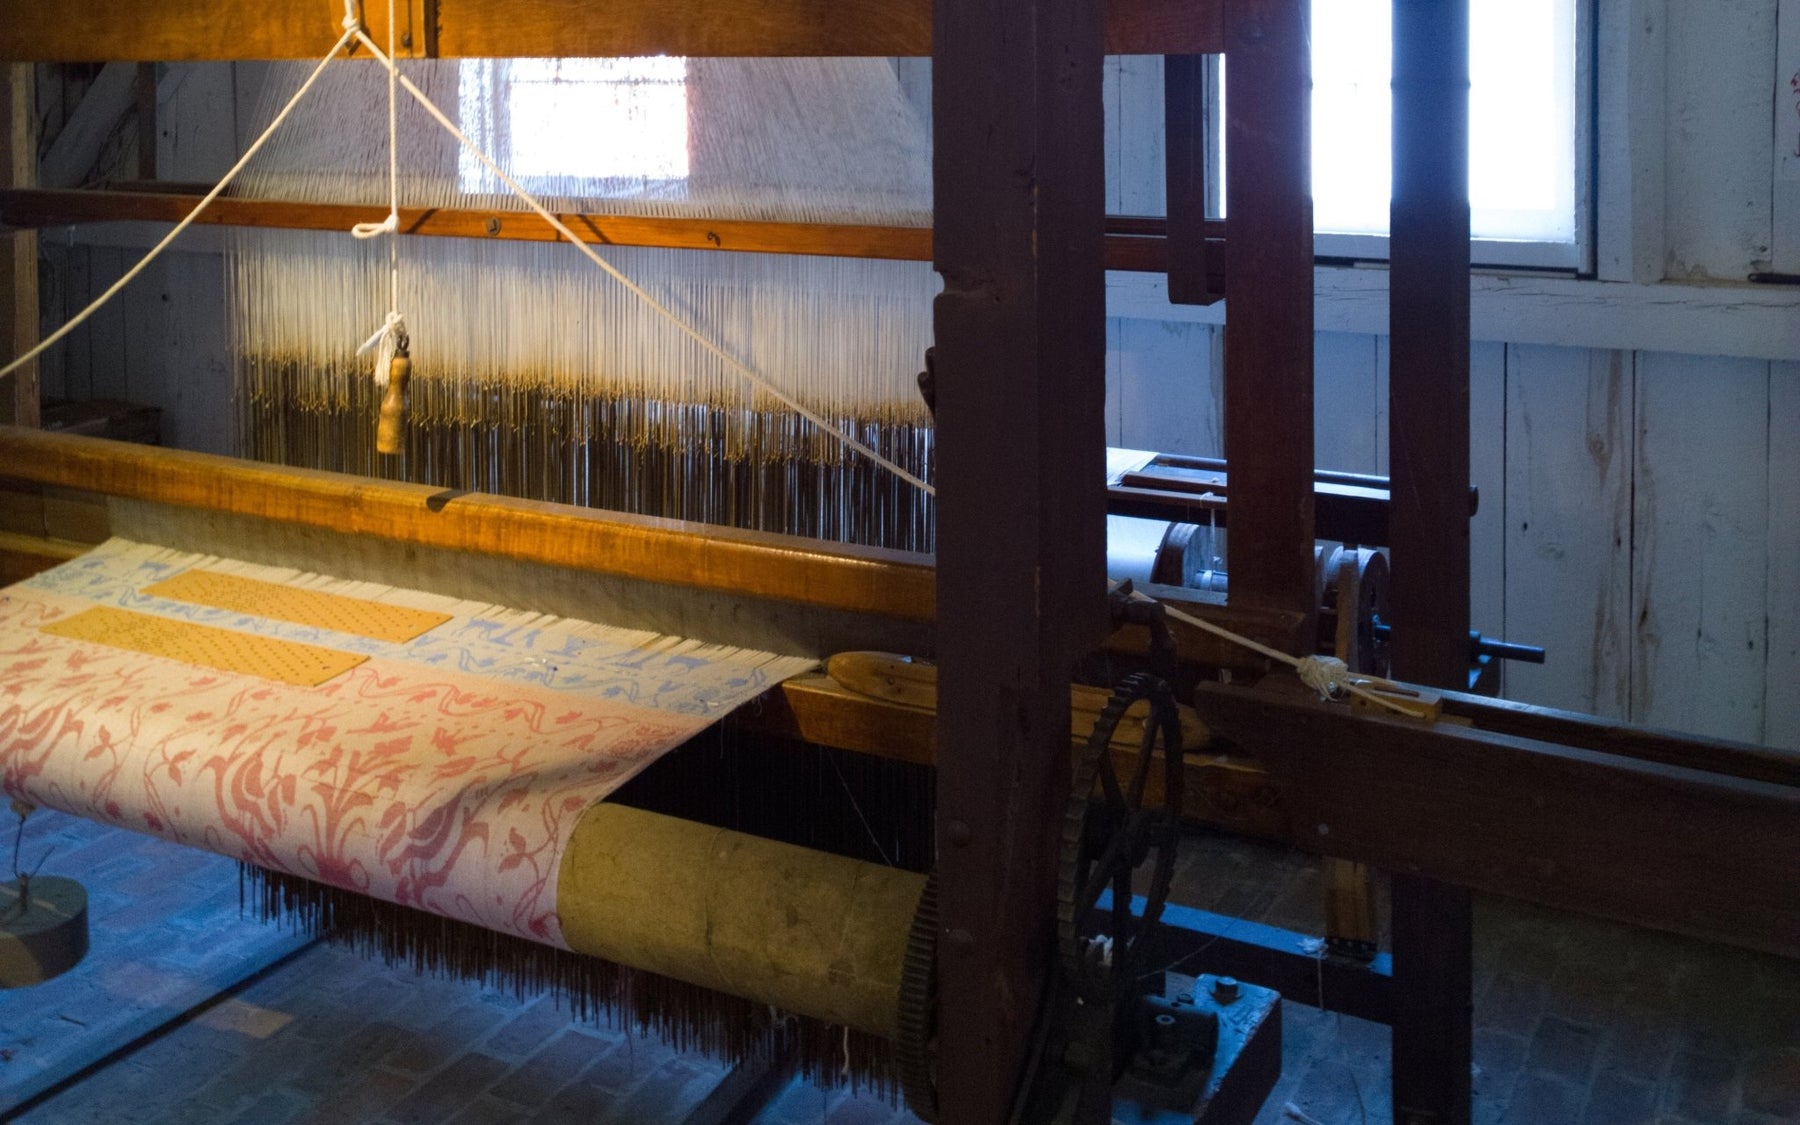 The Intriguing Connection Between Ancient Weaving and Modern Computers